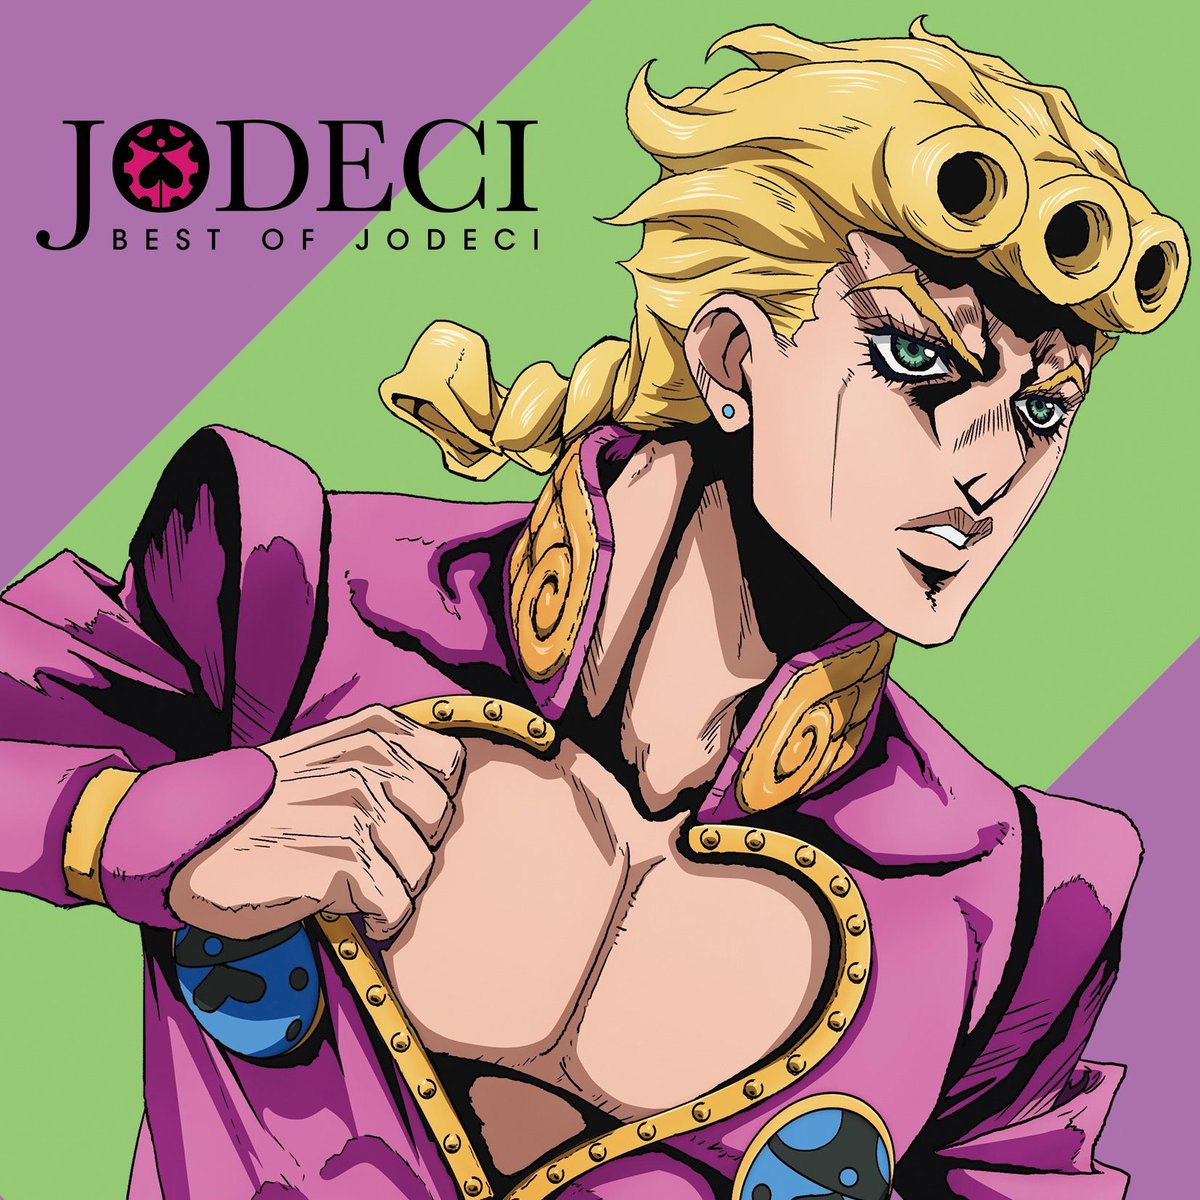 Is this a JoJo reference? – Blue & Gold